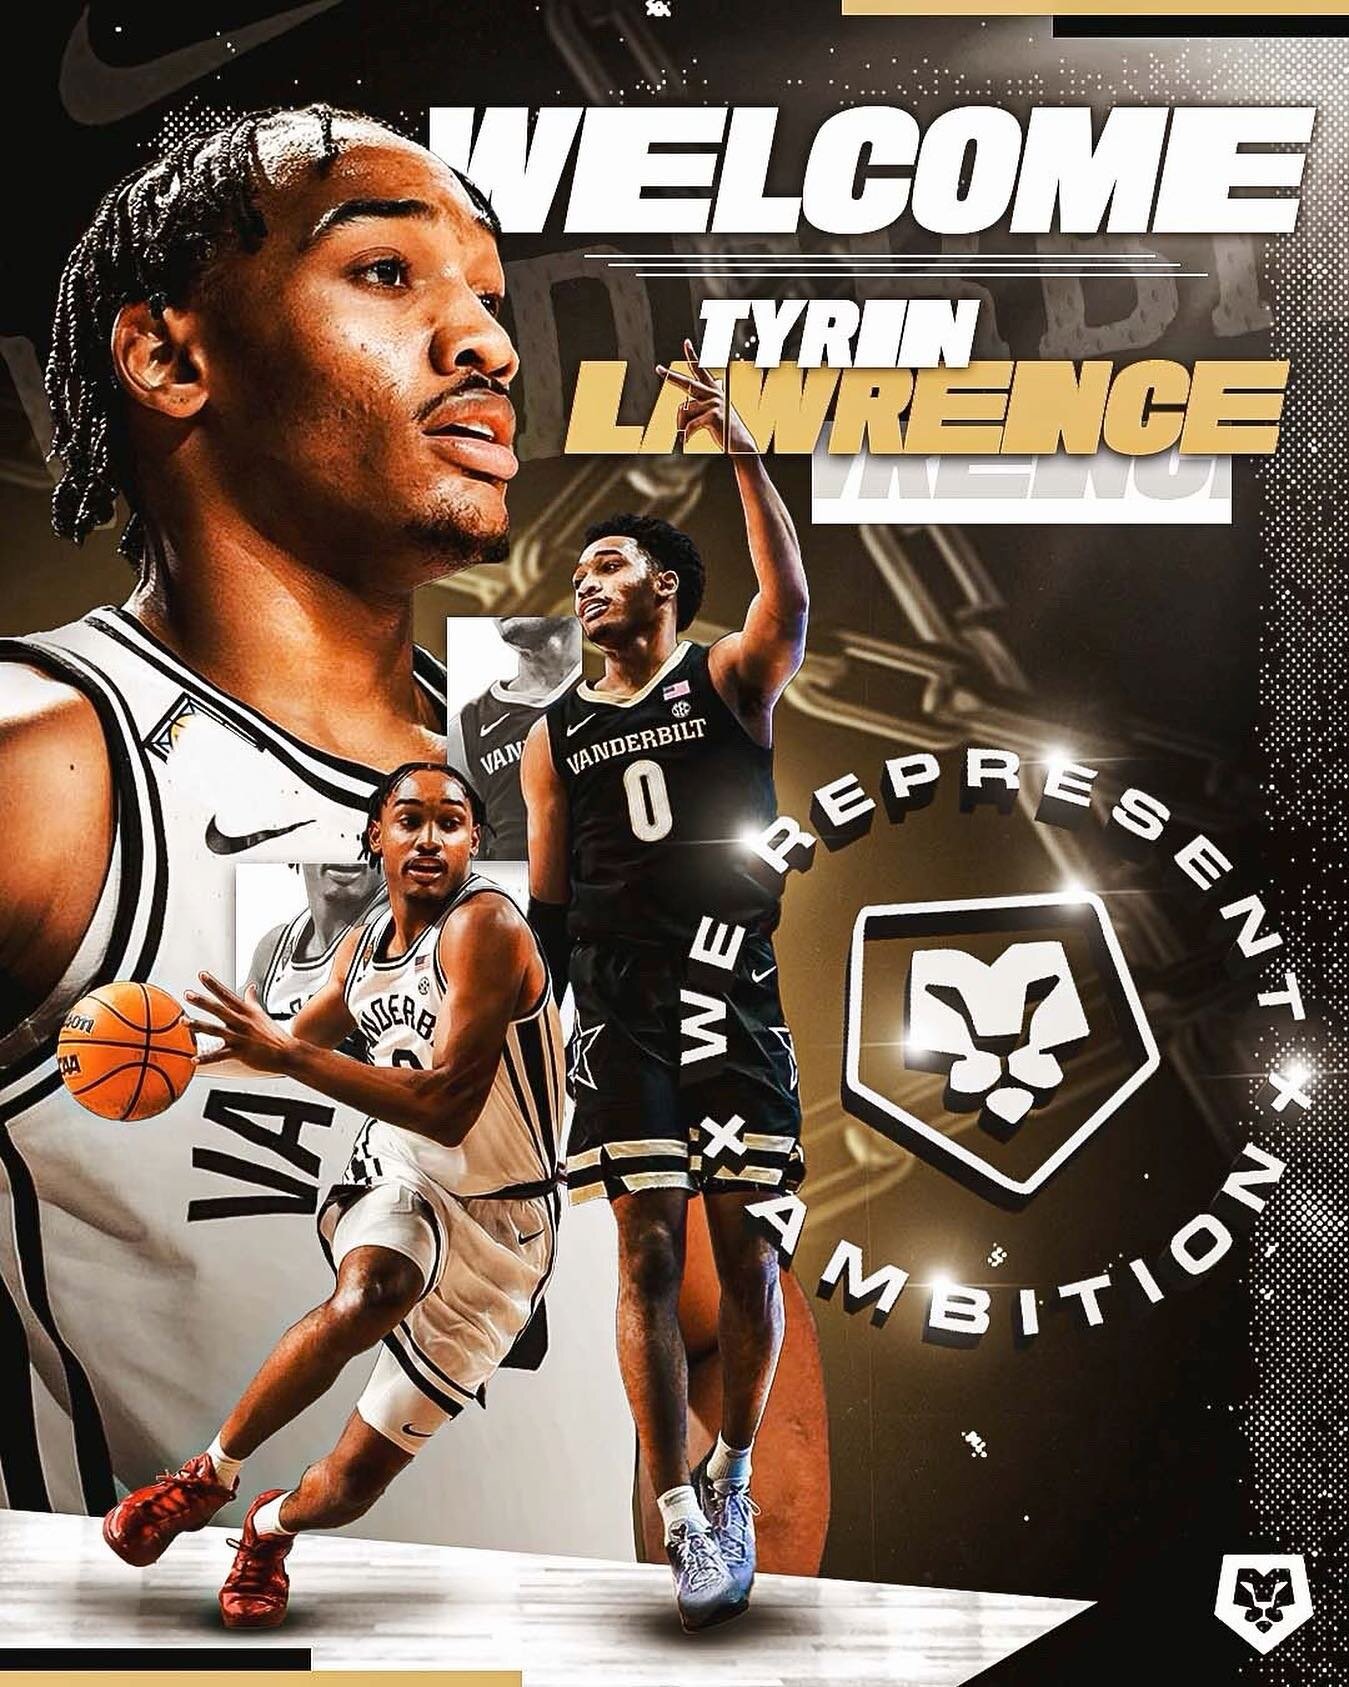 Excited to welcome @tyrinlawrence to the MSG Family! 

#WeRepresentAmbition